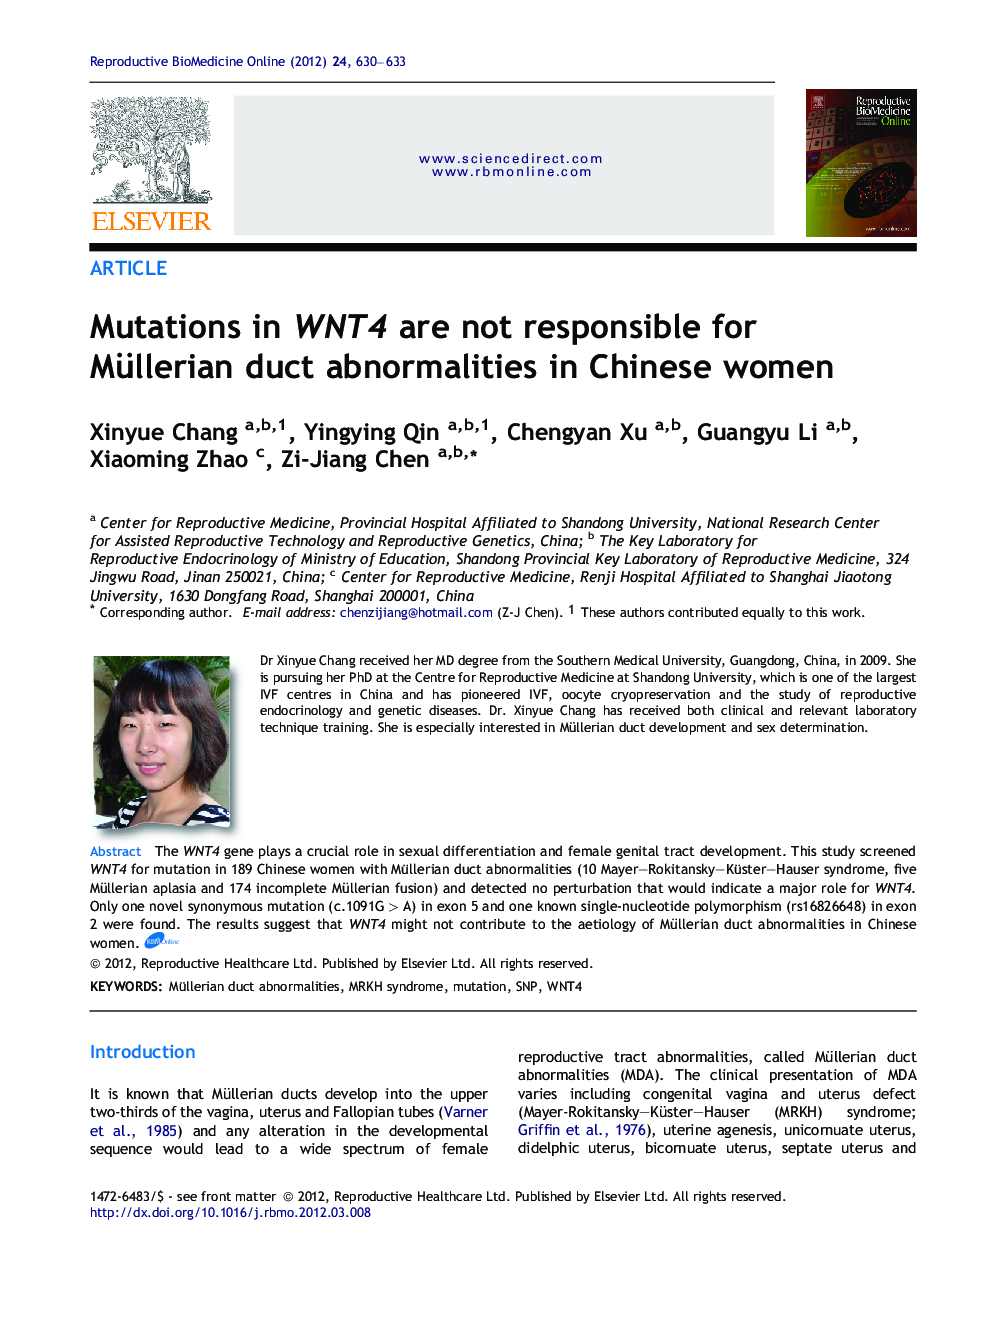 Mutations in WNT4 are not responsible for Müllerian duct abnormalities in Chinese women 